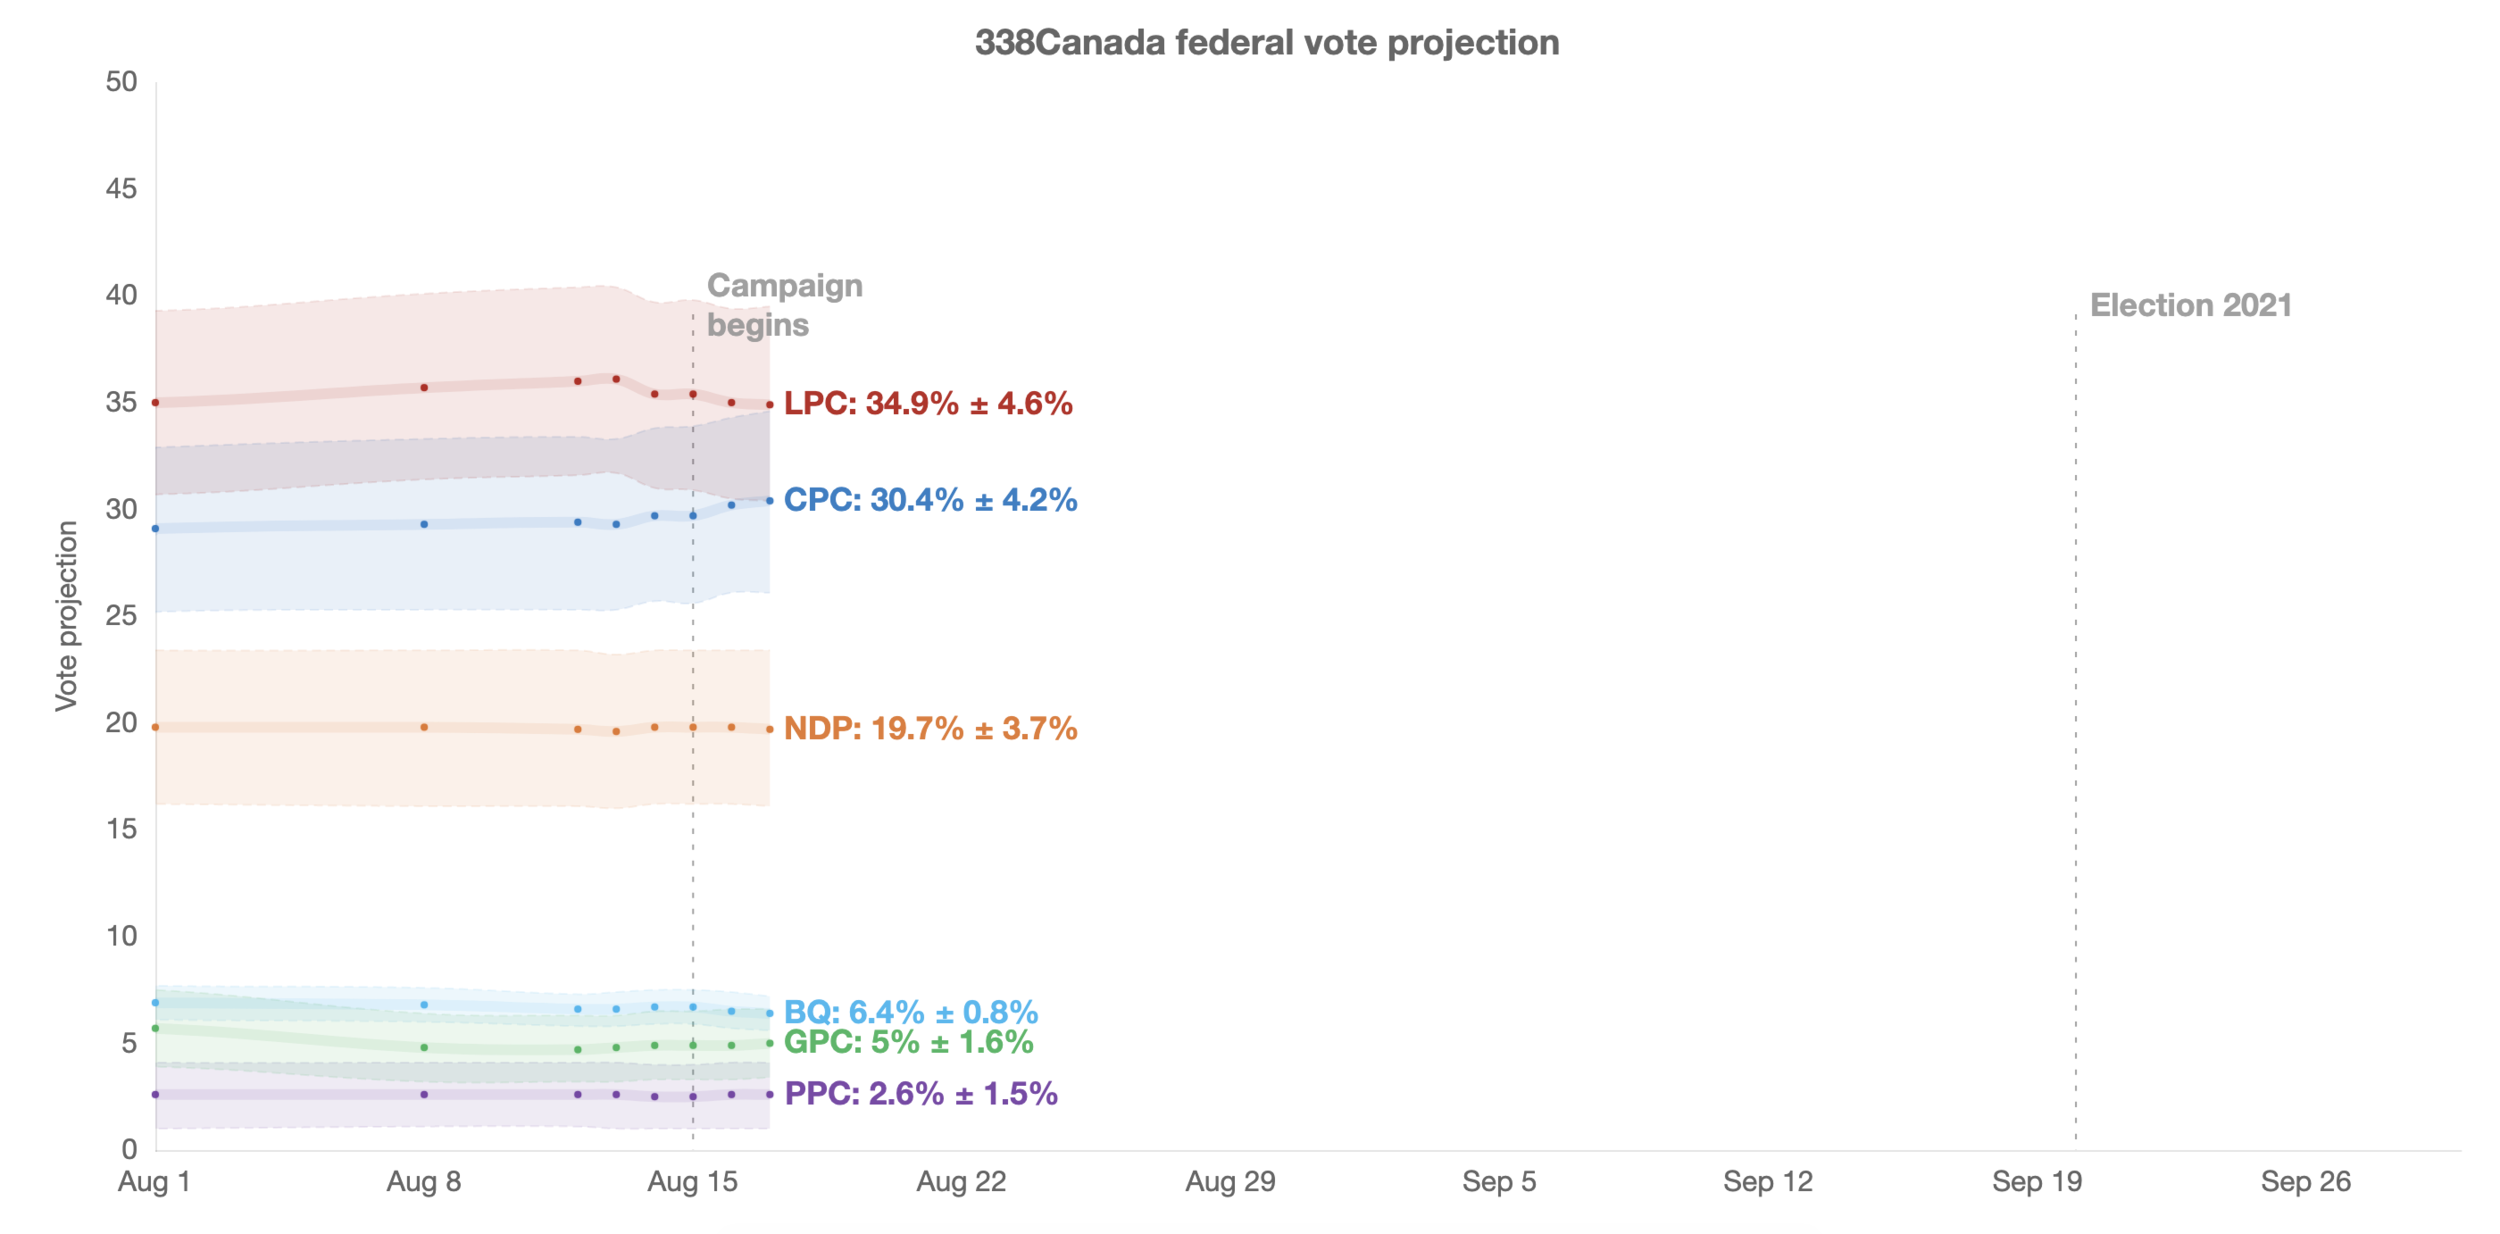 Federal election vote projections from 338 Canada.